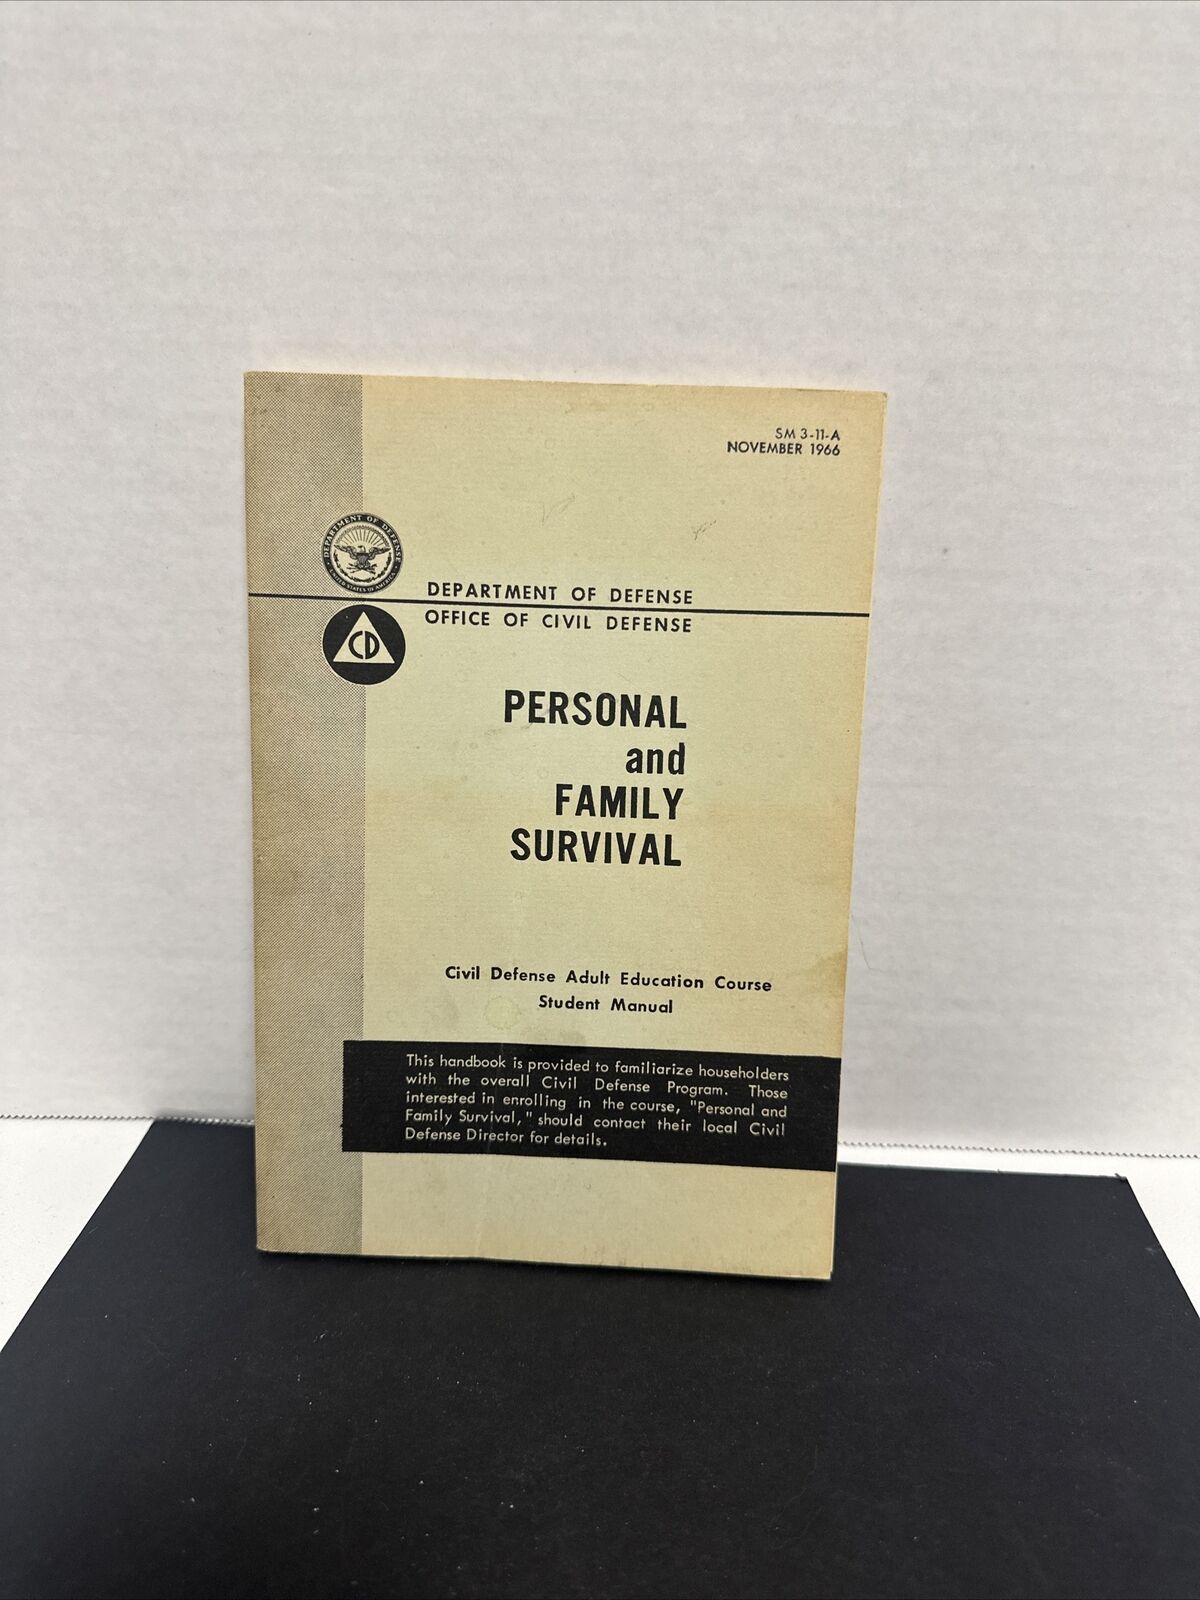 VINTAGE 1966 Department of Defense Personal and Family Survival Manual SM 3-11-A